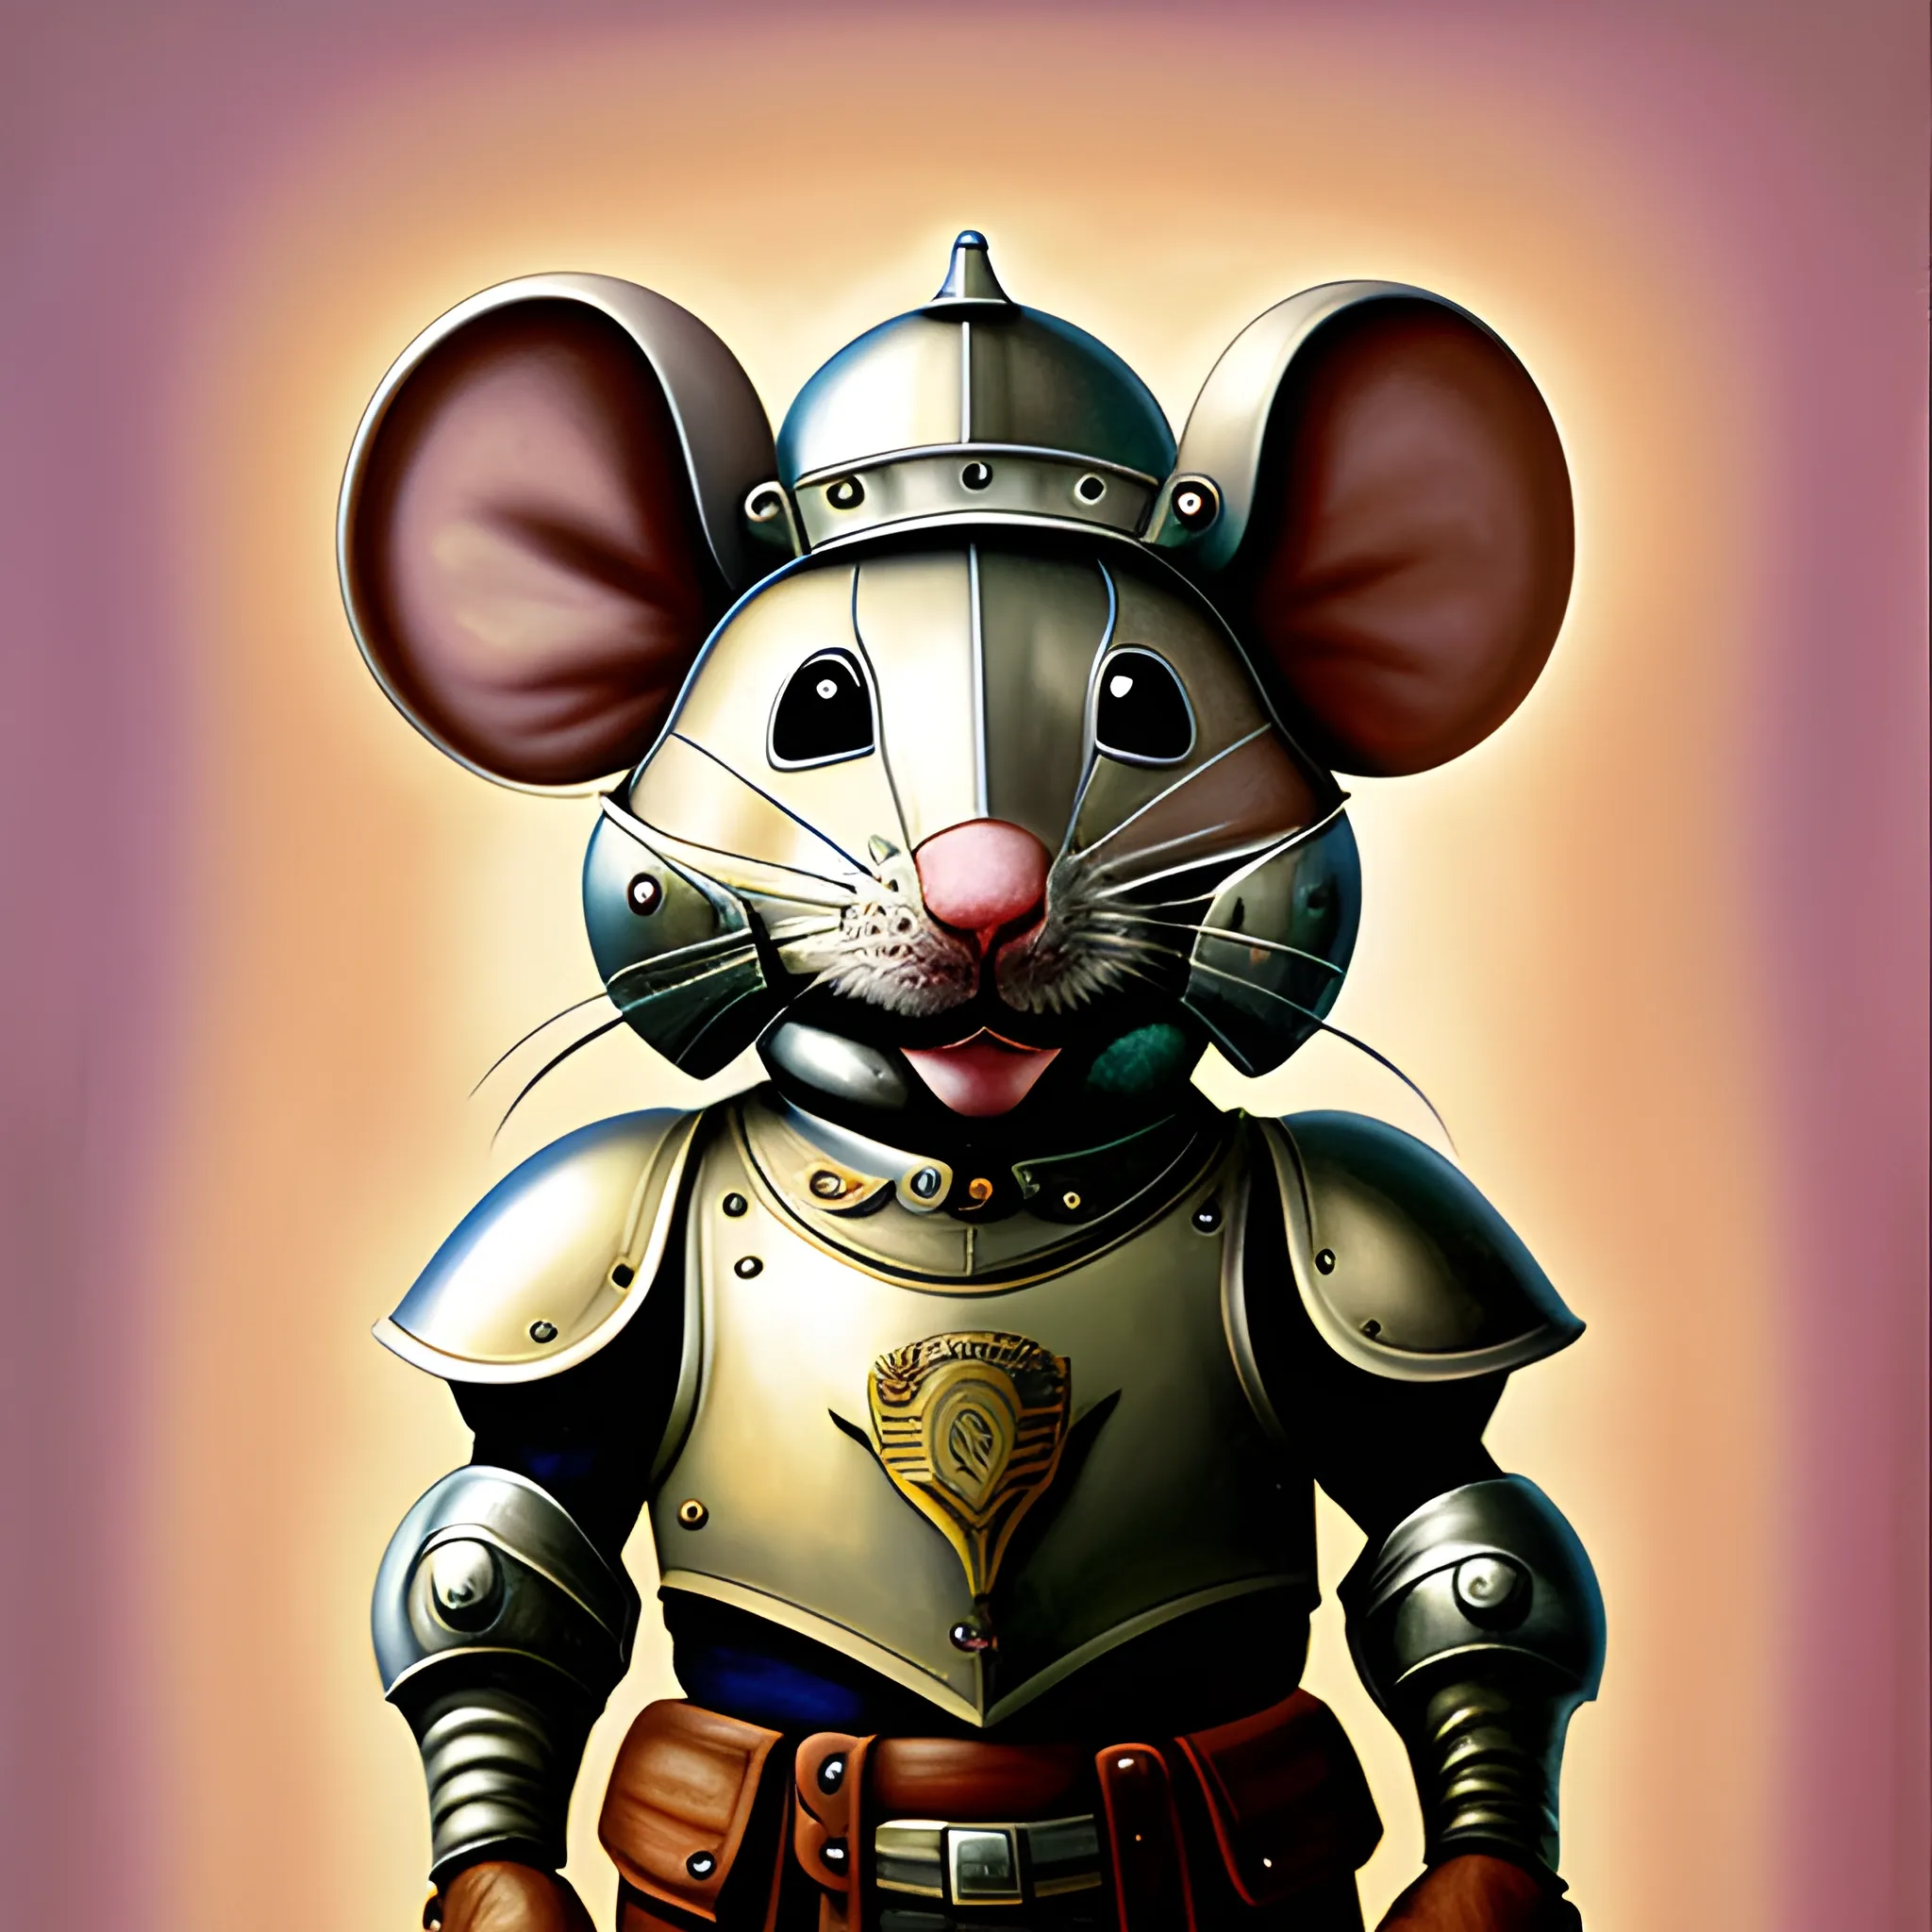 General Mouse is wearing armor. , Oil Painting, Trippy，Just like a mechanical police officer